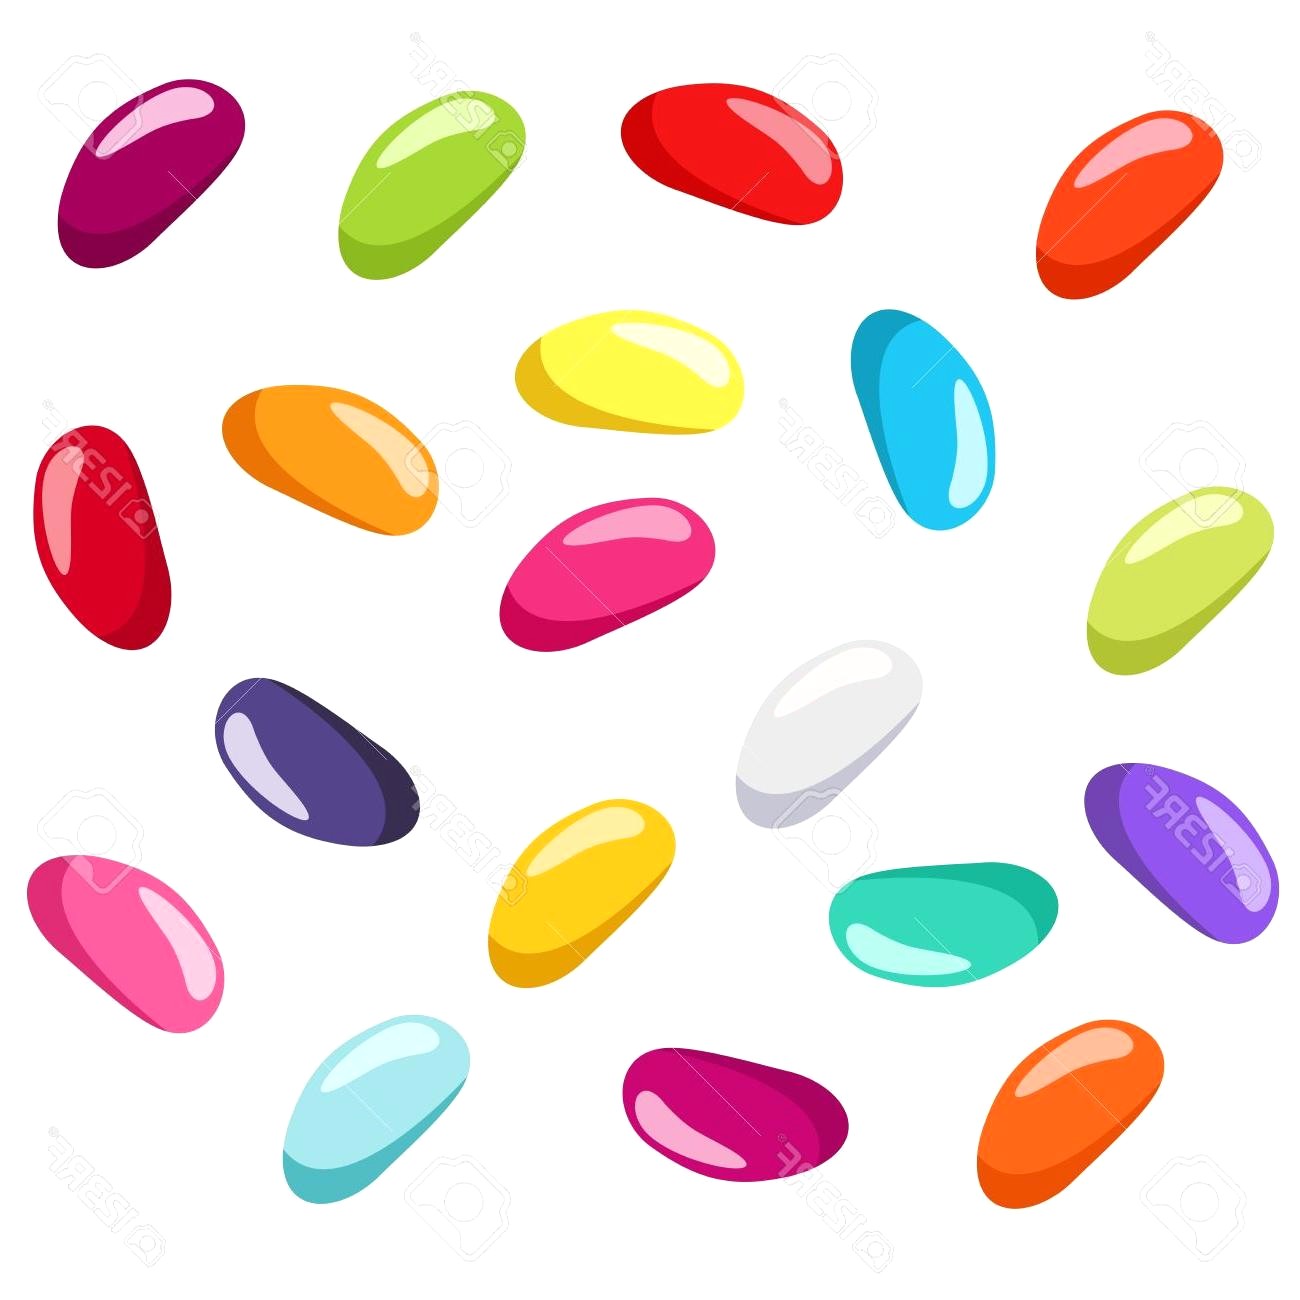 Vector illustration of jelly beans on a white background. Colorful jelly candy, sweet and chewy ...